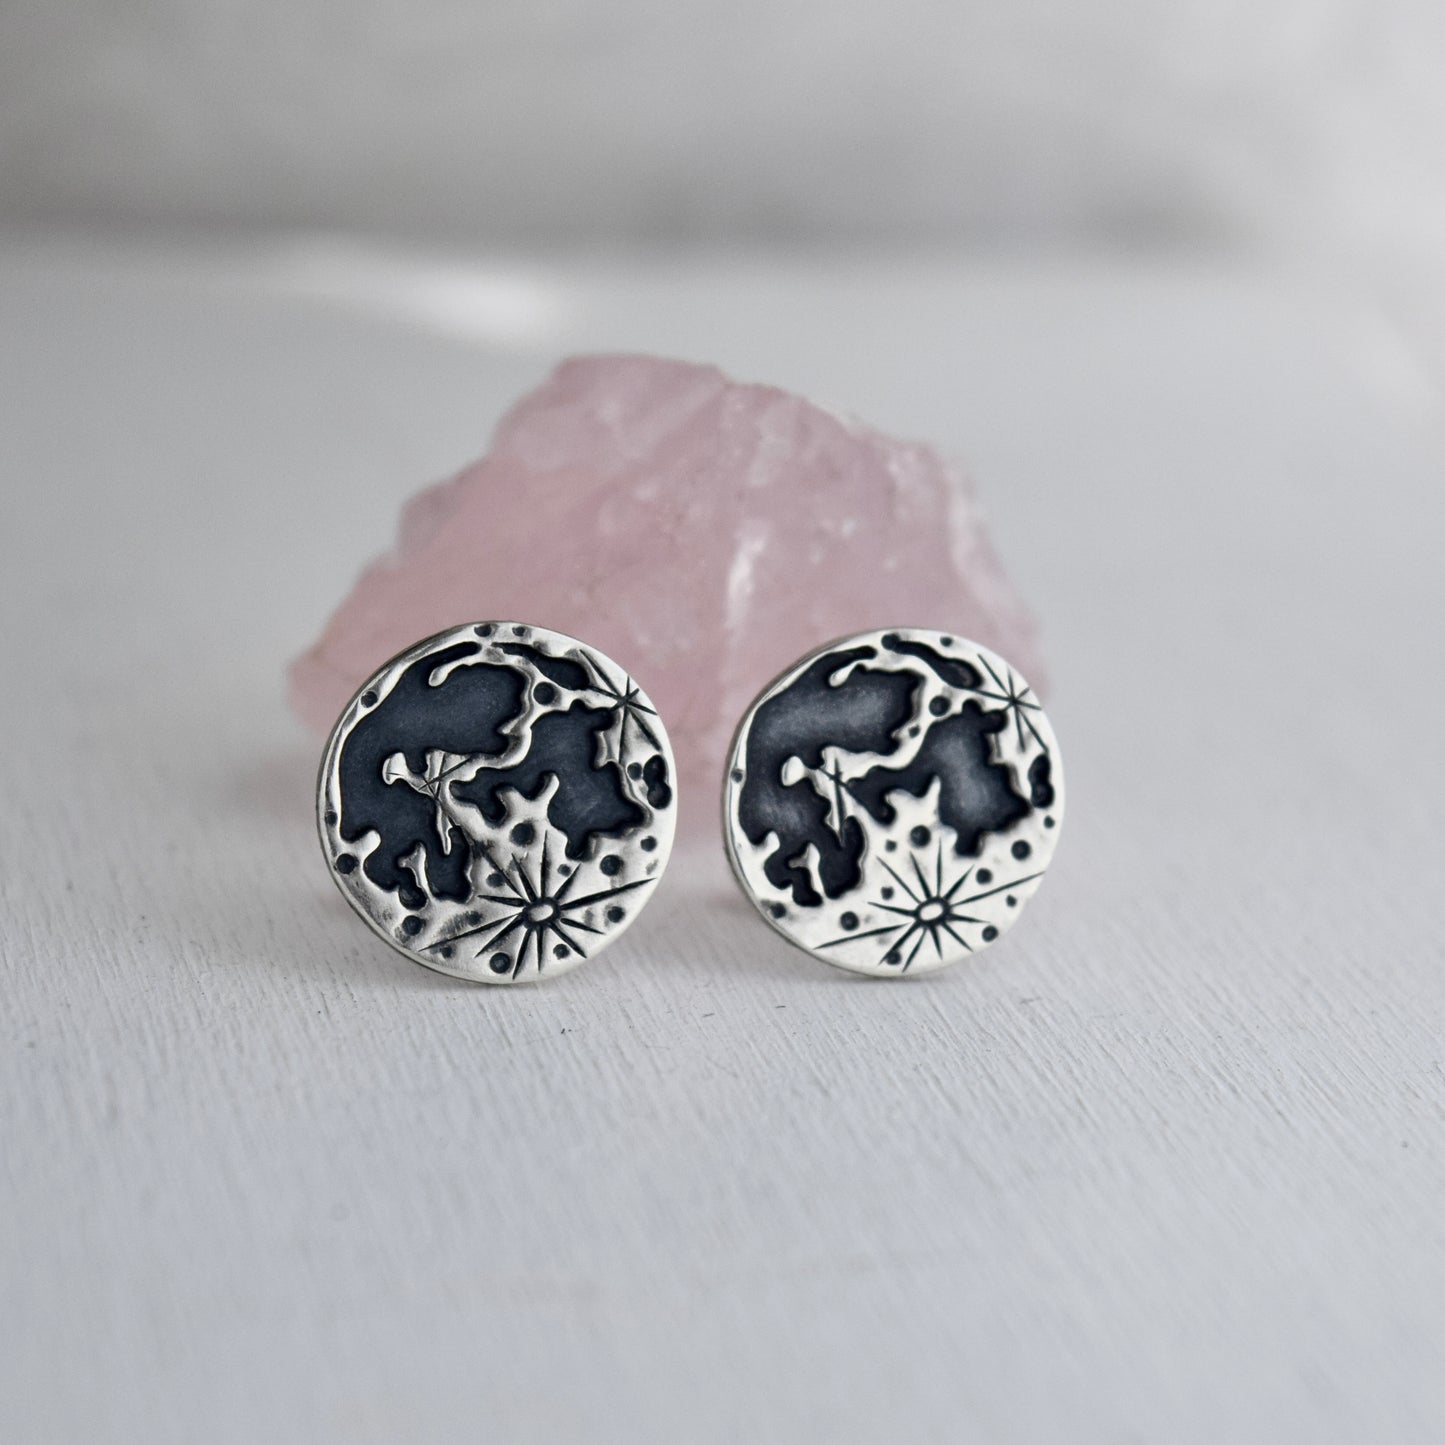 Made-to-Order Lunar Phase Cuff Links